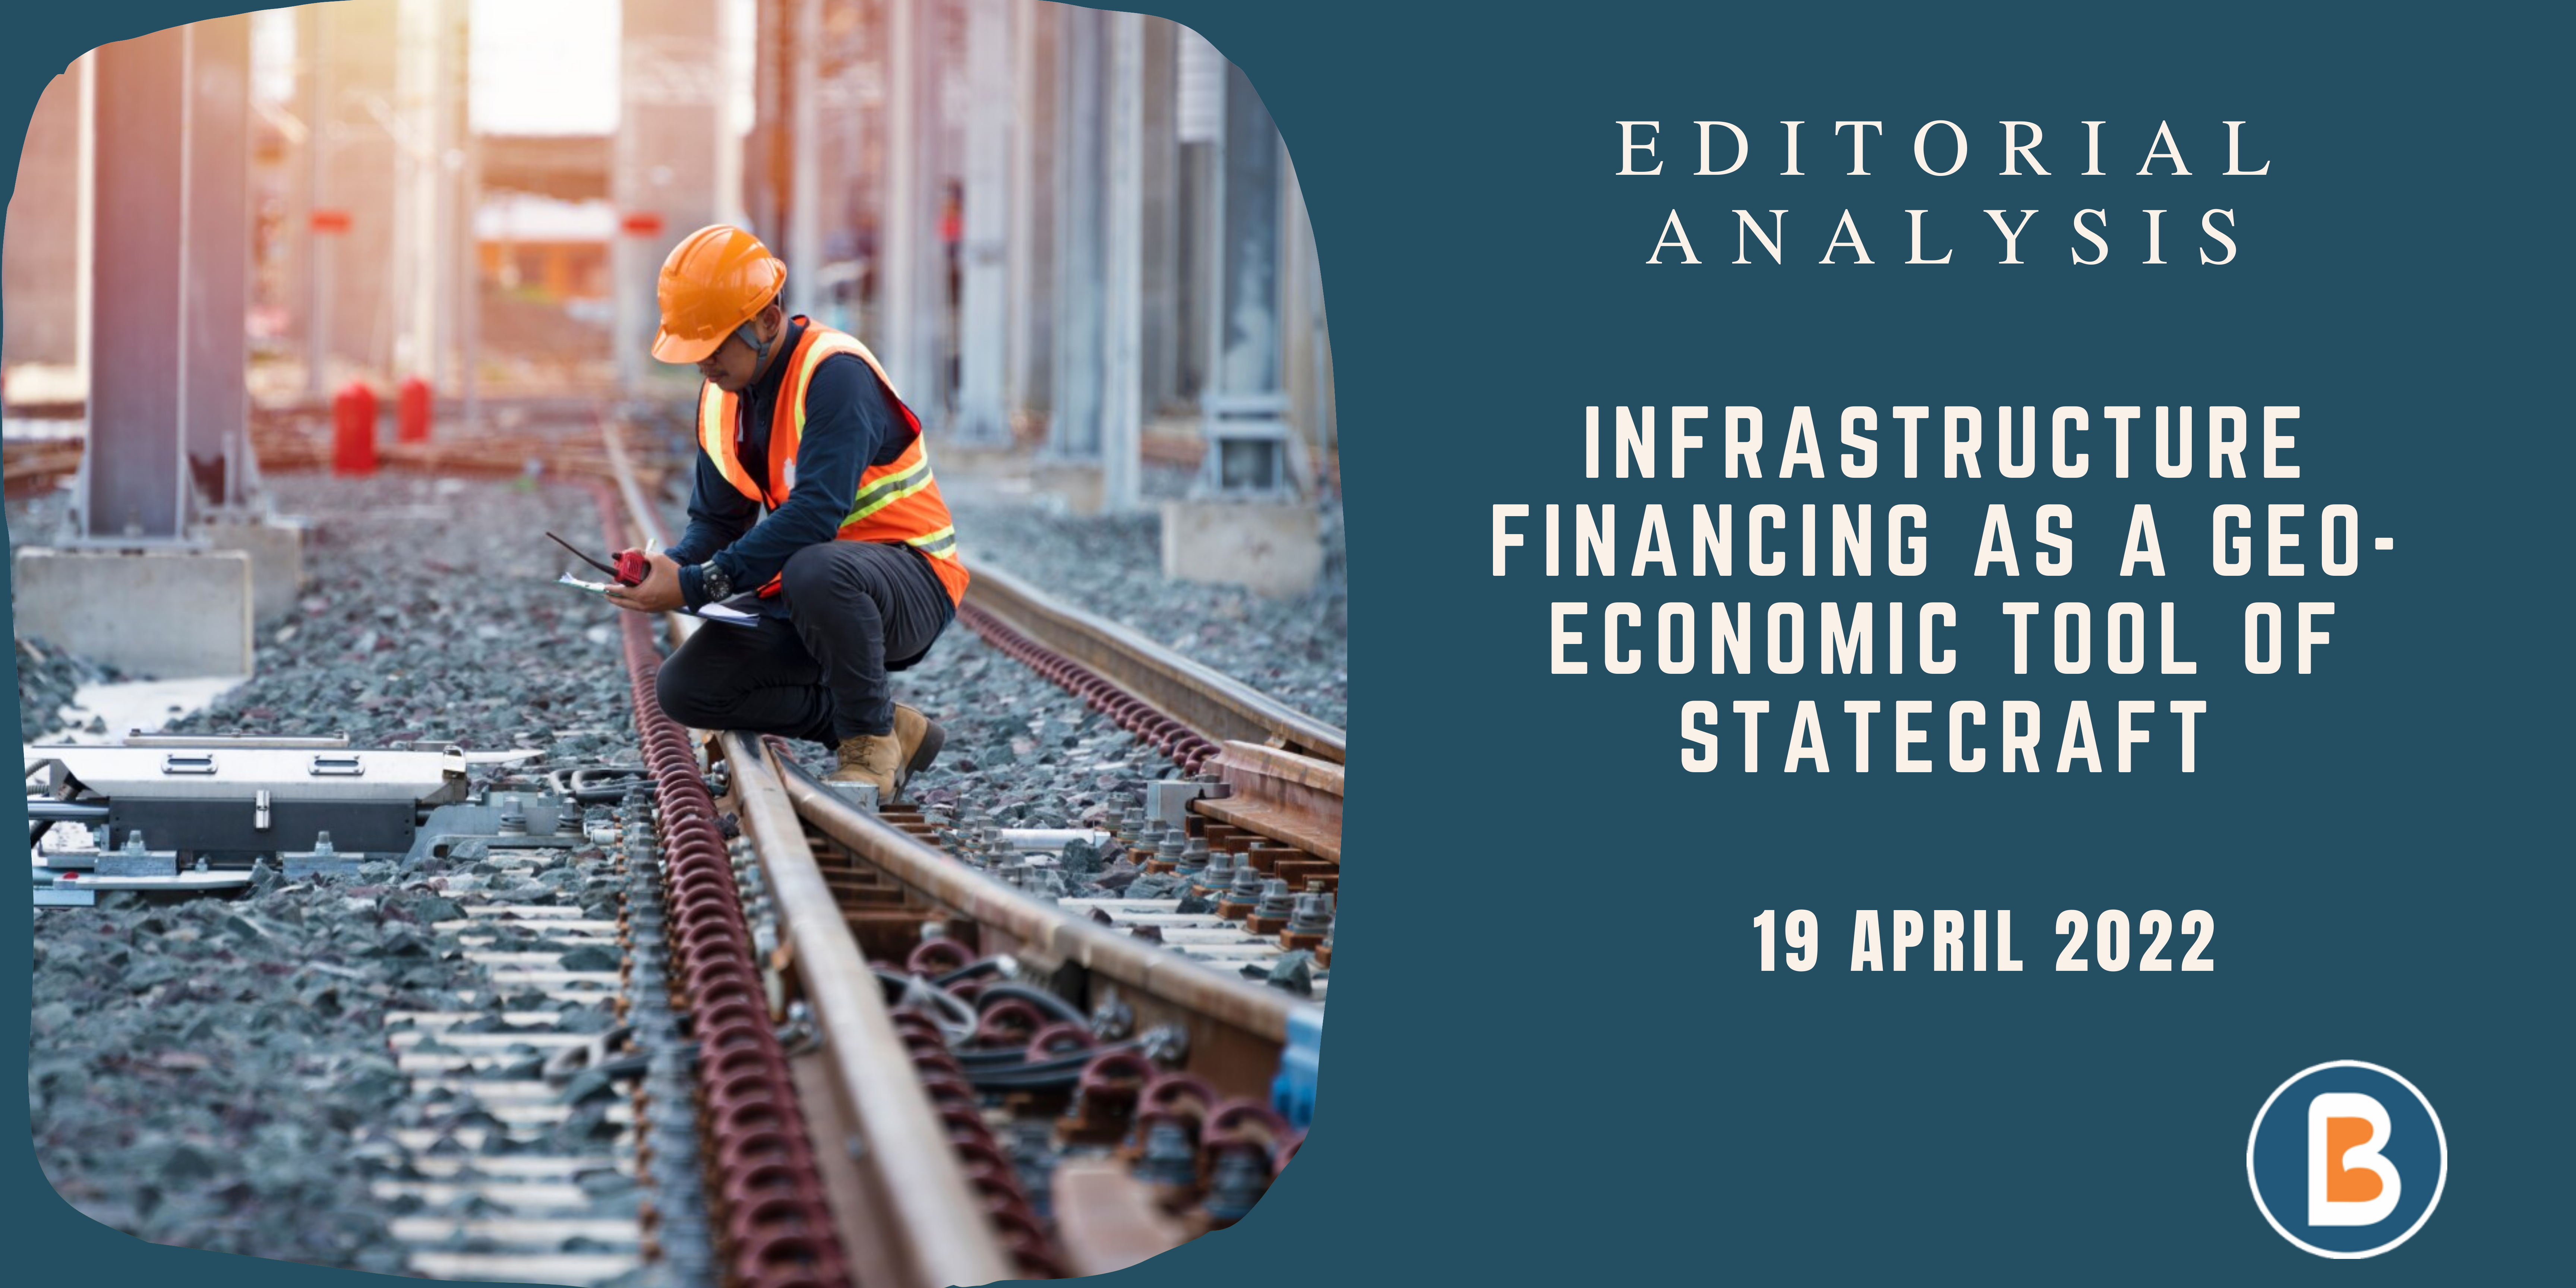 Editorial Analysis for IAS - Infrastructure Financing as a Geo-Economic Tool of Statecraft